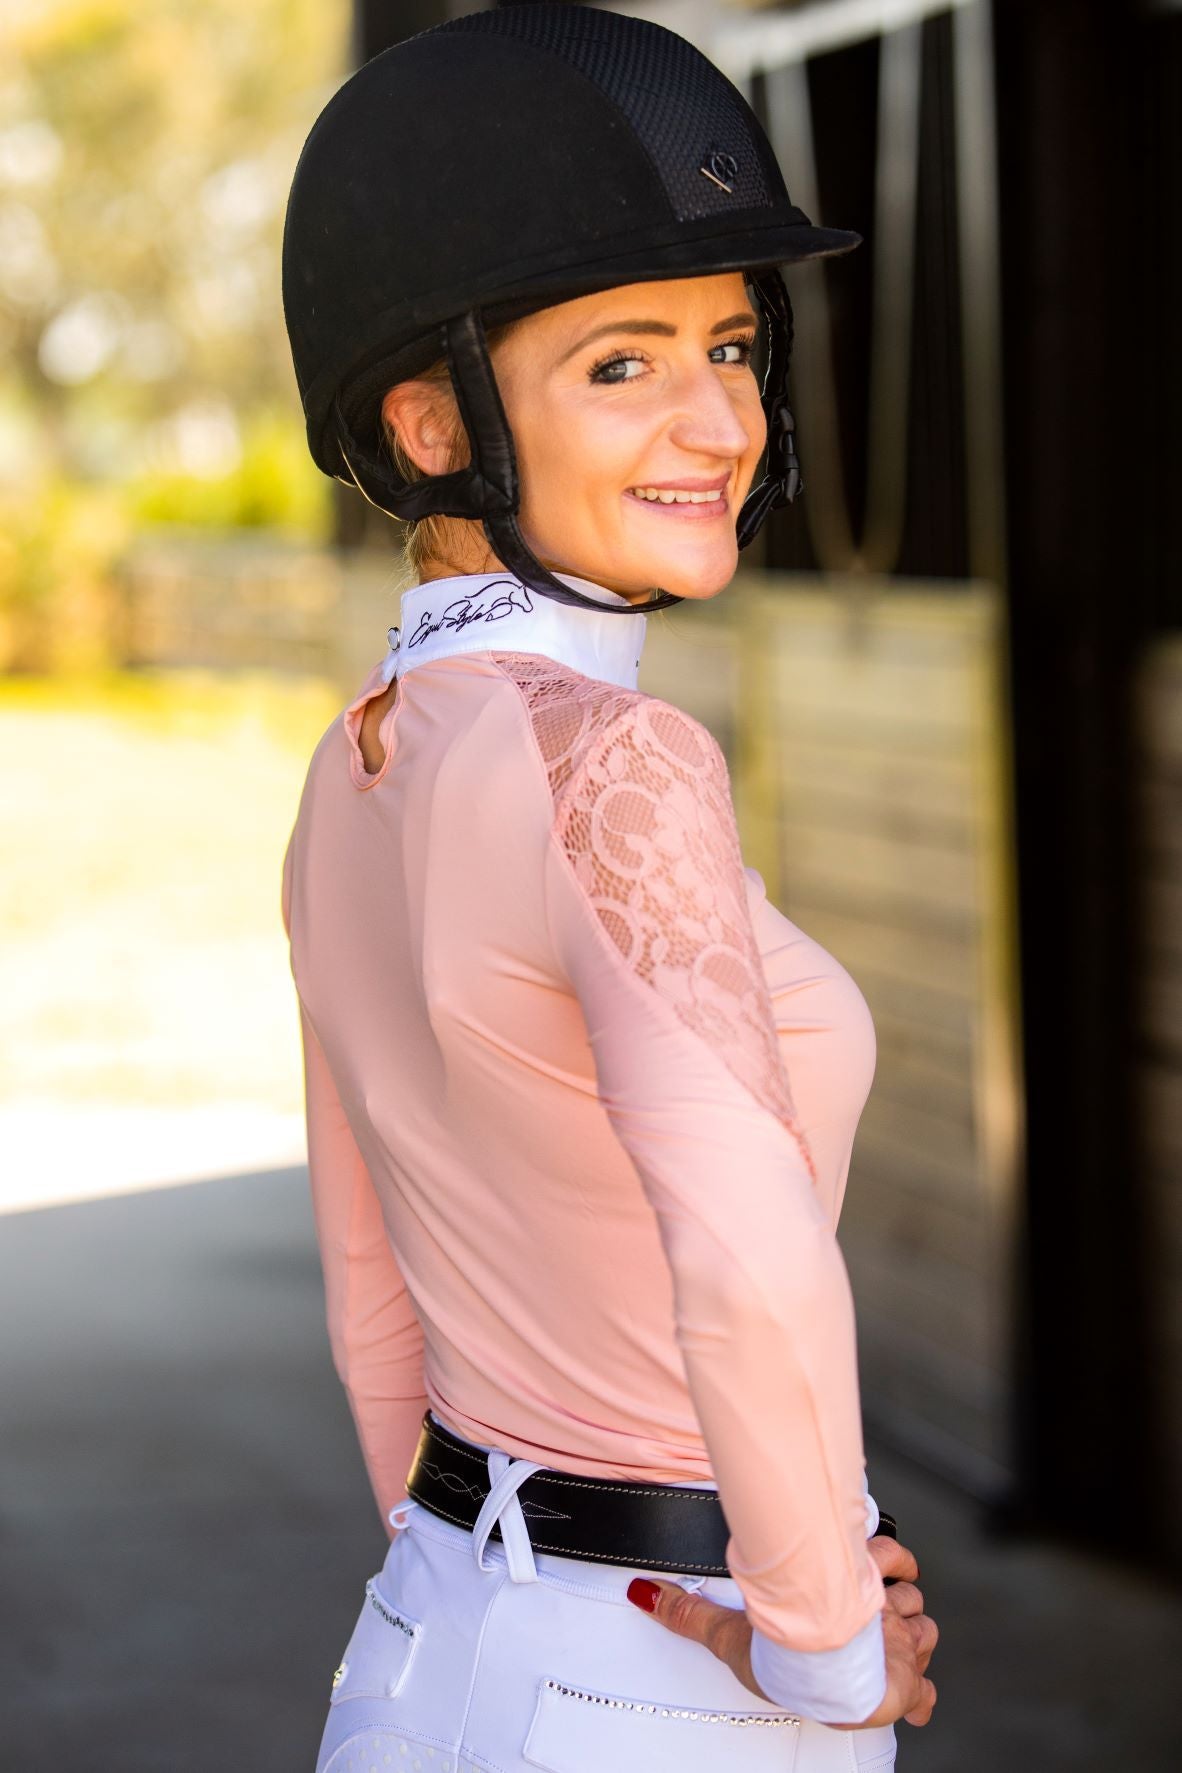 Equistyle Long Sleeve Lace Shirt - Peach - Equiluxe Tack